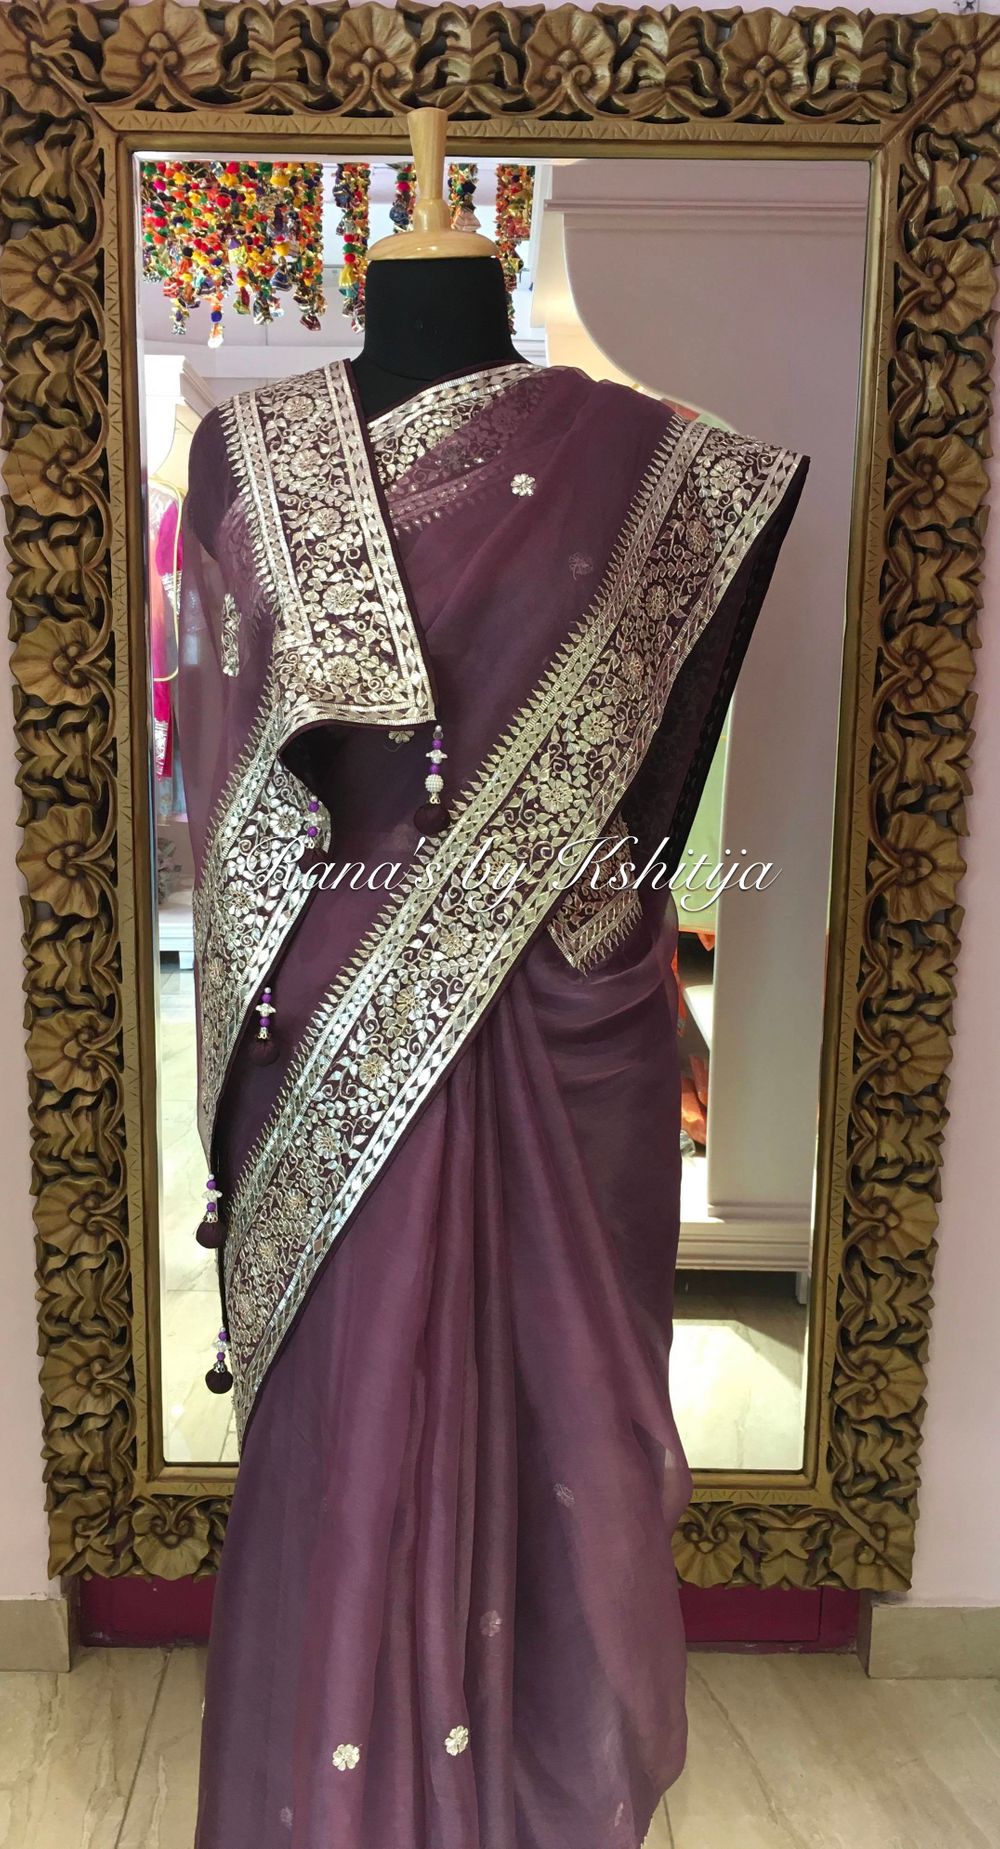 Photo From Designer Range of Gorgeous Handmade Outfits - By RANA'S by Kshitija